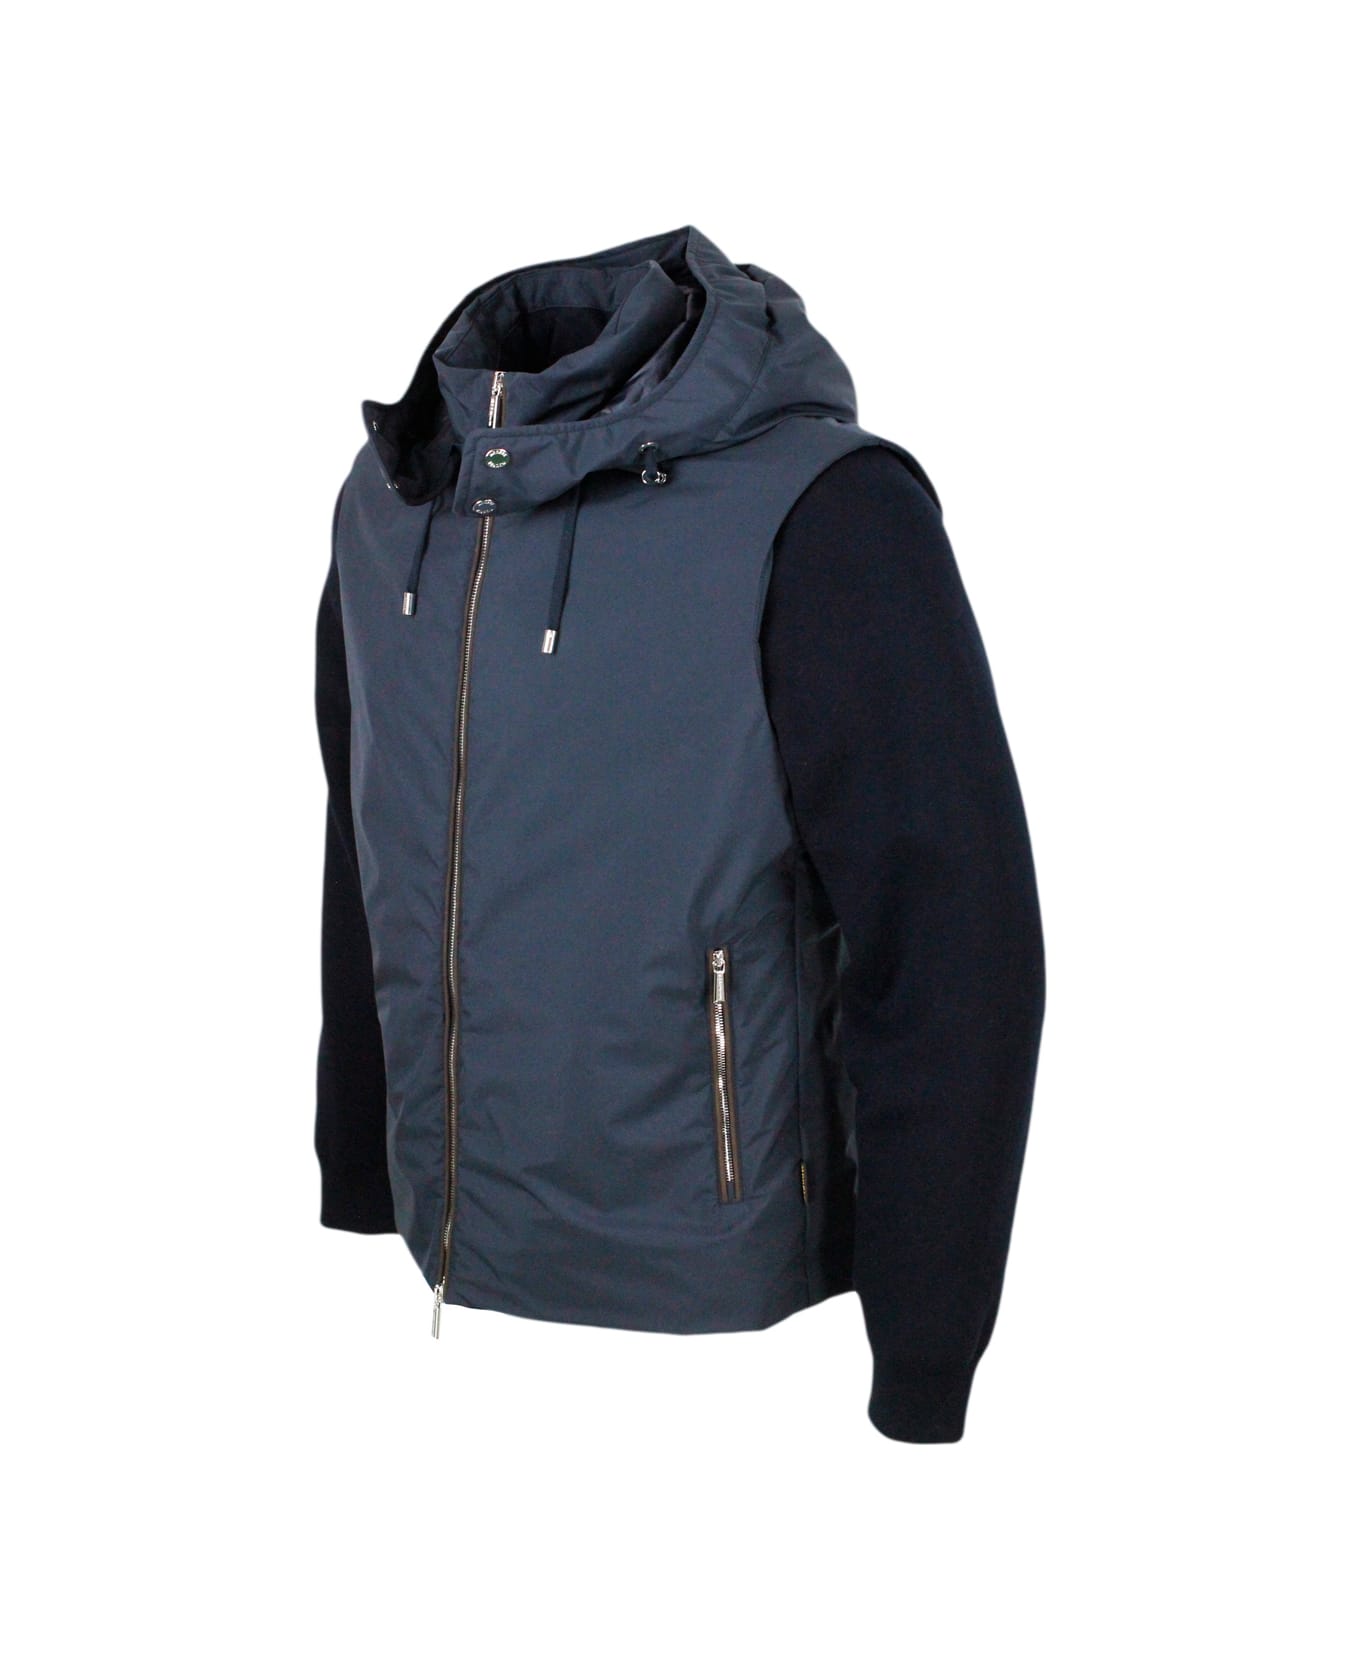 Moorer Bomber Jacket In A Mix Of Materials With Detachable Hood In Smooth Waterproof Fabric And Padded With Light Down. The Cotton Sleeves Are Detachable - Blu